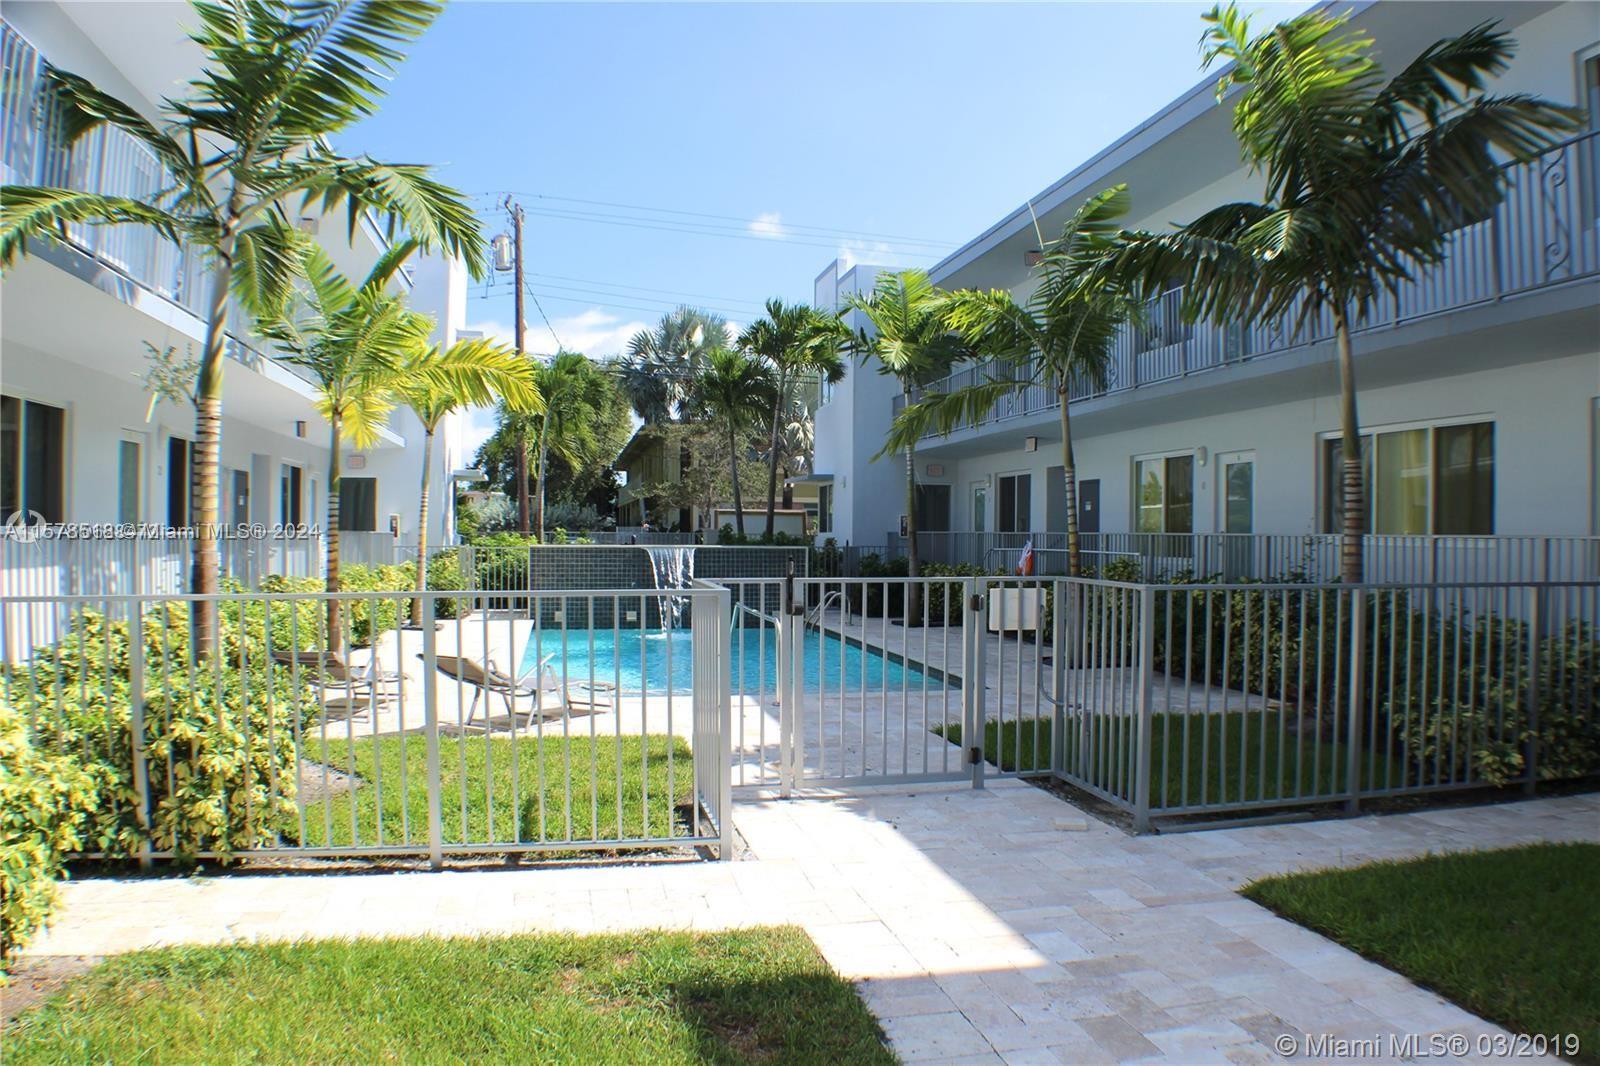 Property for Sale at Address Not Disclosed, Miami Beach, Miami-Dade County, Florida - Bedrooms: 2 
Bathrooms: 2  - $370,000